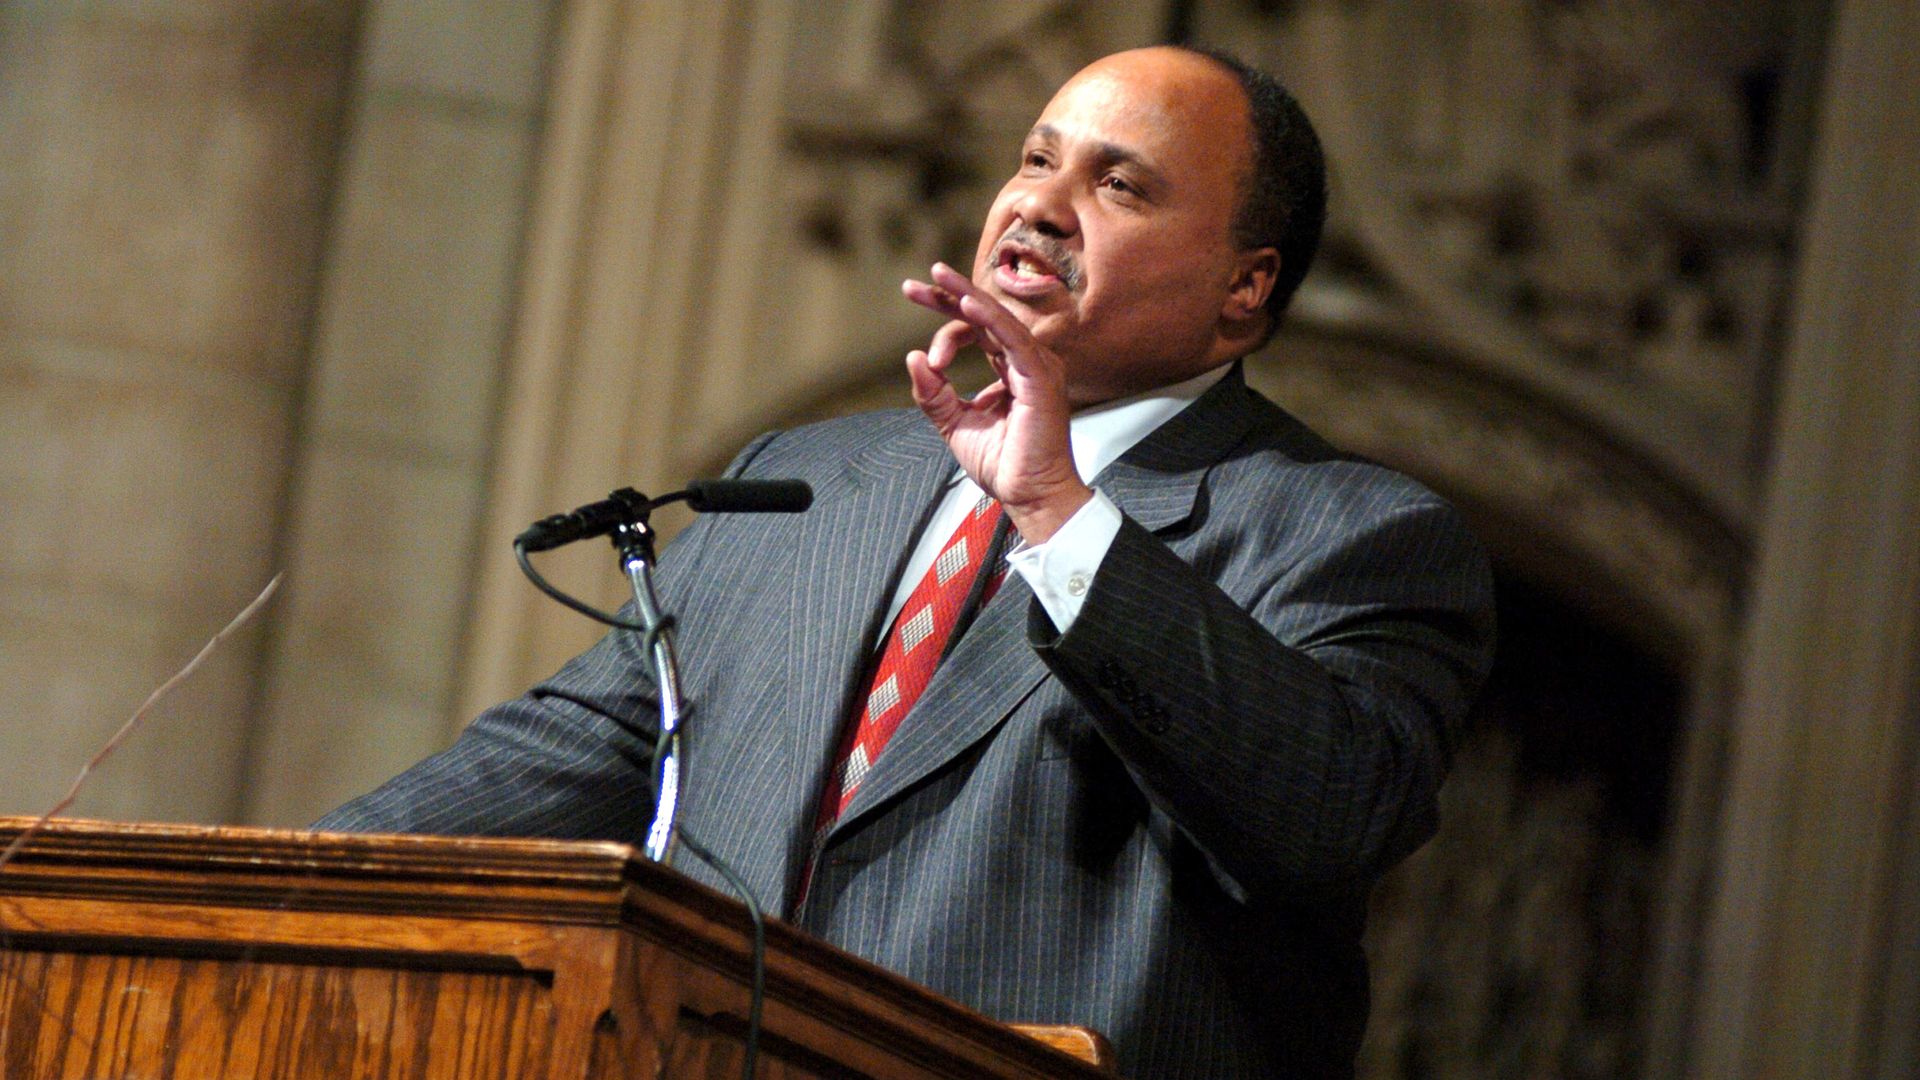 Martin Luther King III during The "Realizing the Dream" Martin Luther King Jr. Tribute